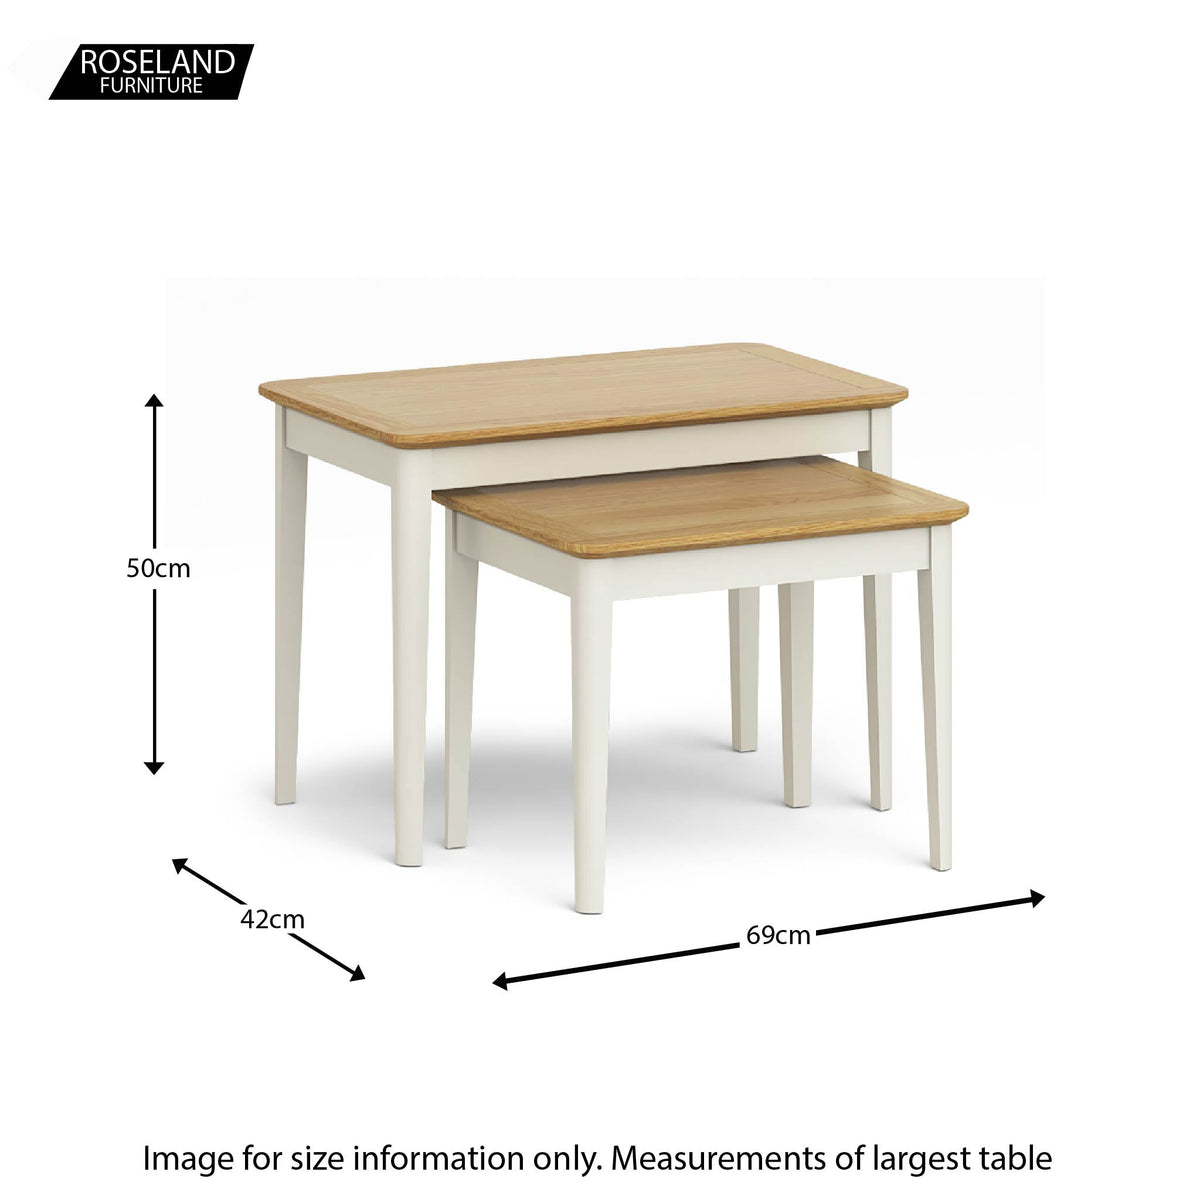 Windsor Cream Nest of Tables size guide